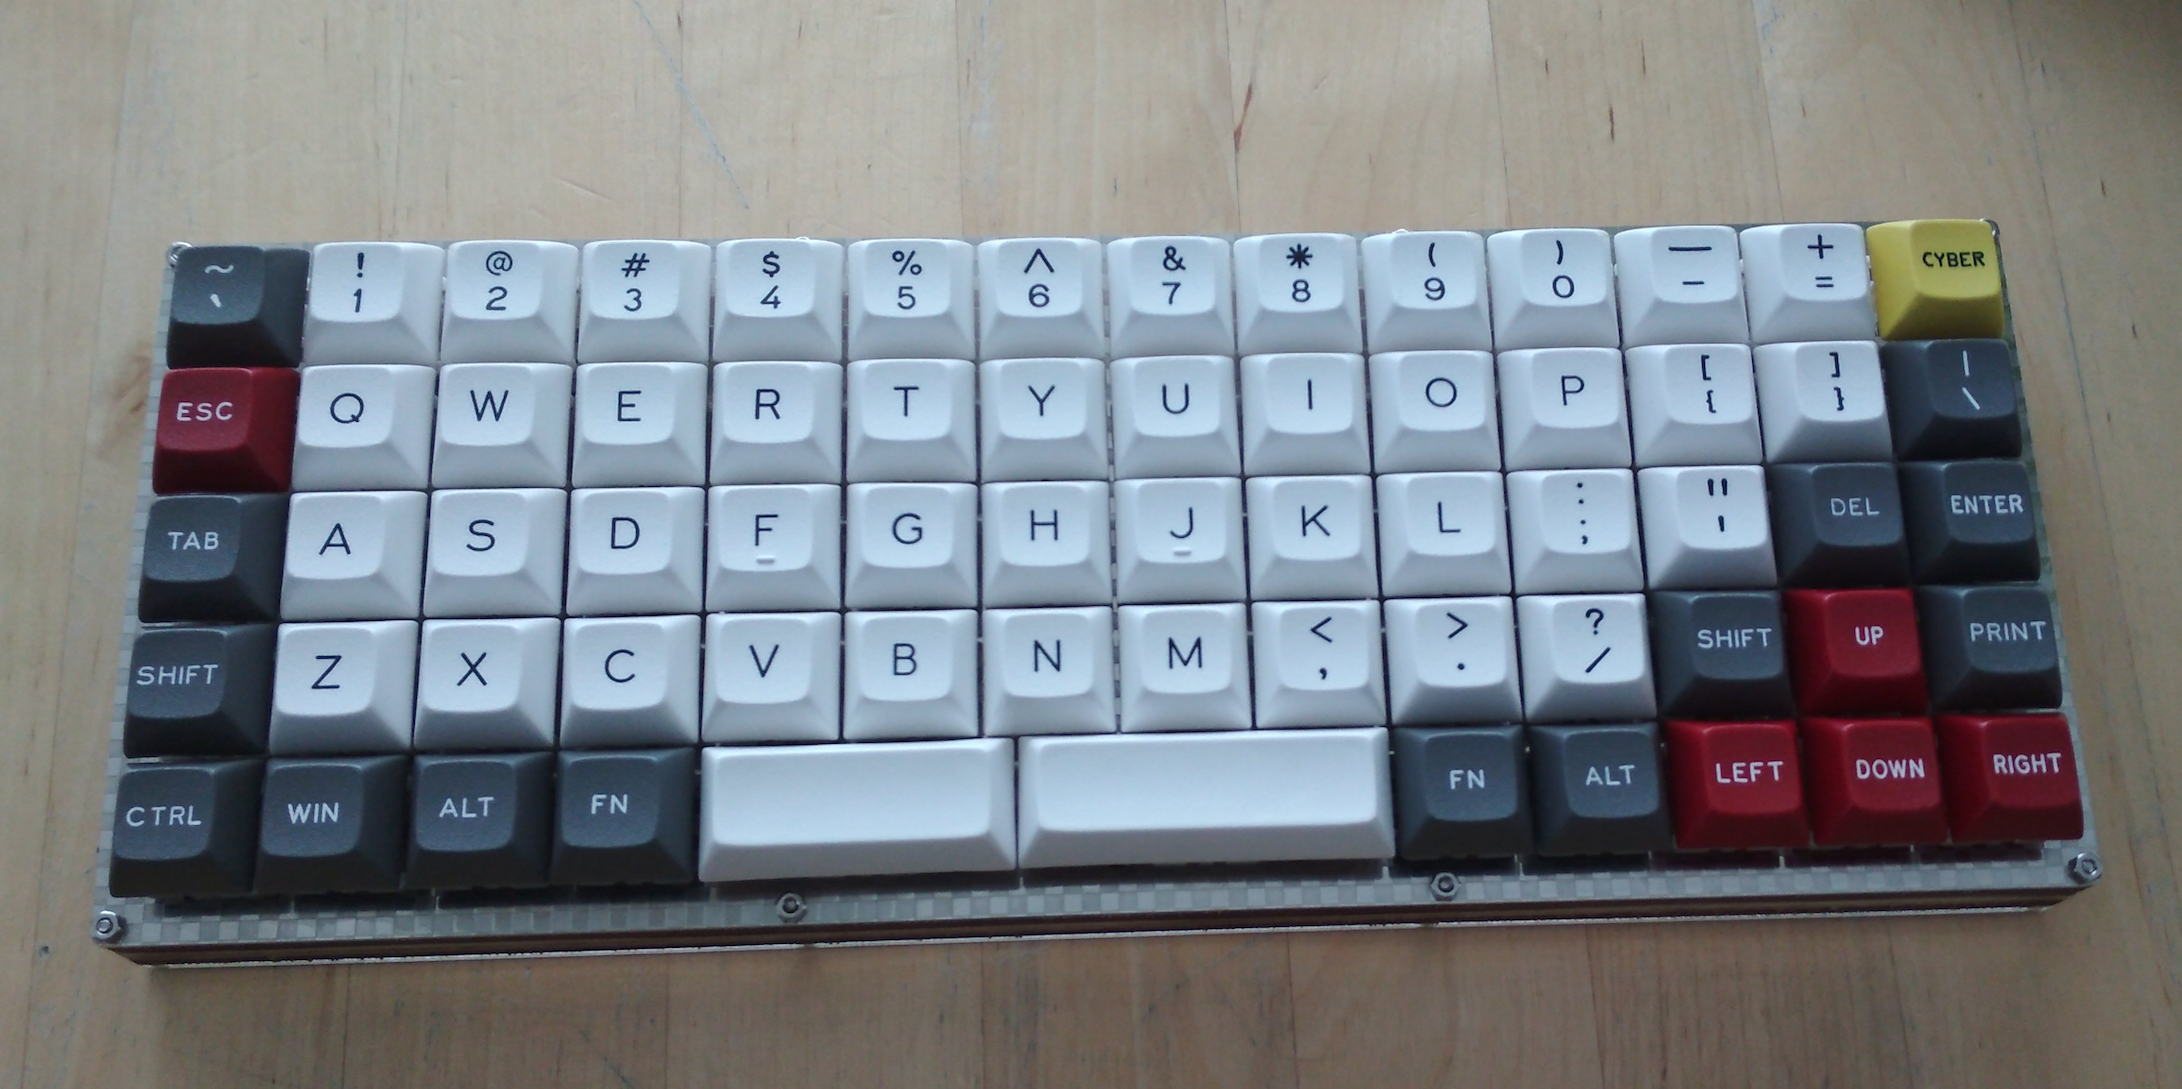 the Planck that is possibly easier to type on?